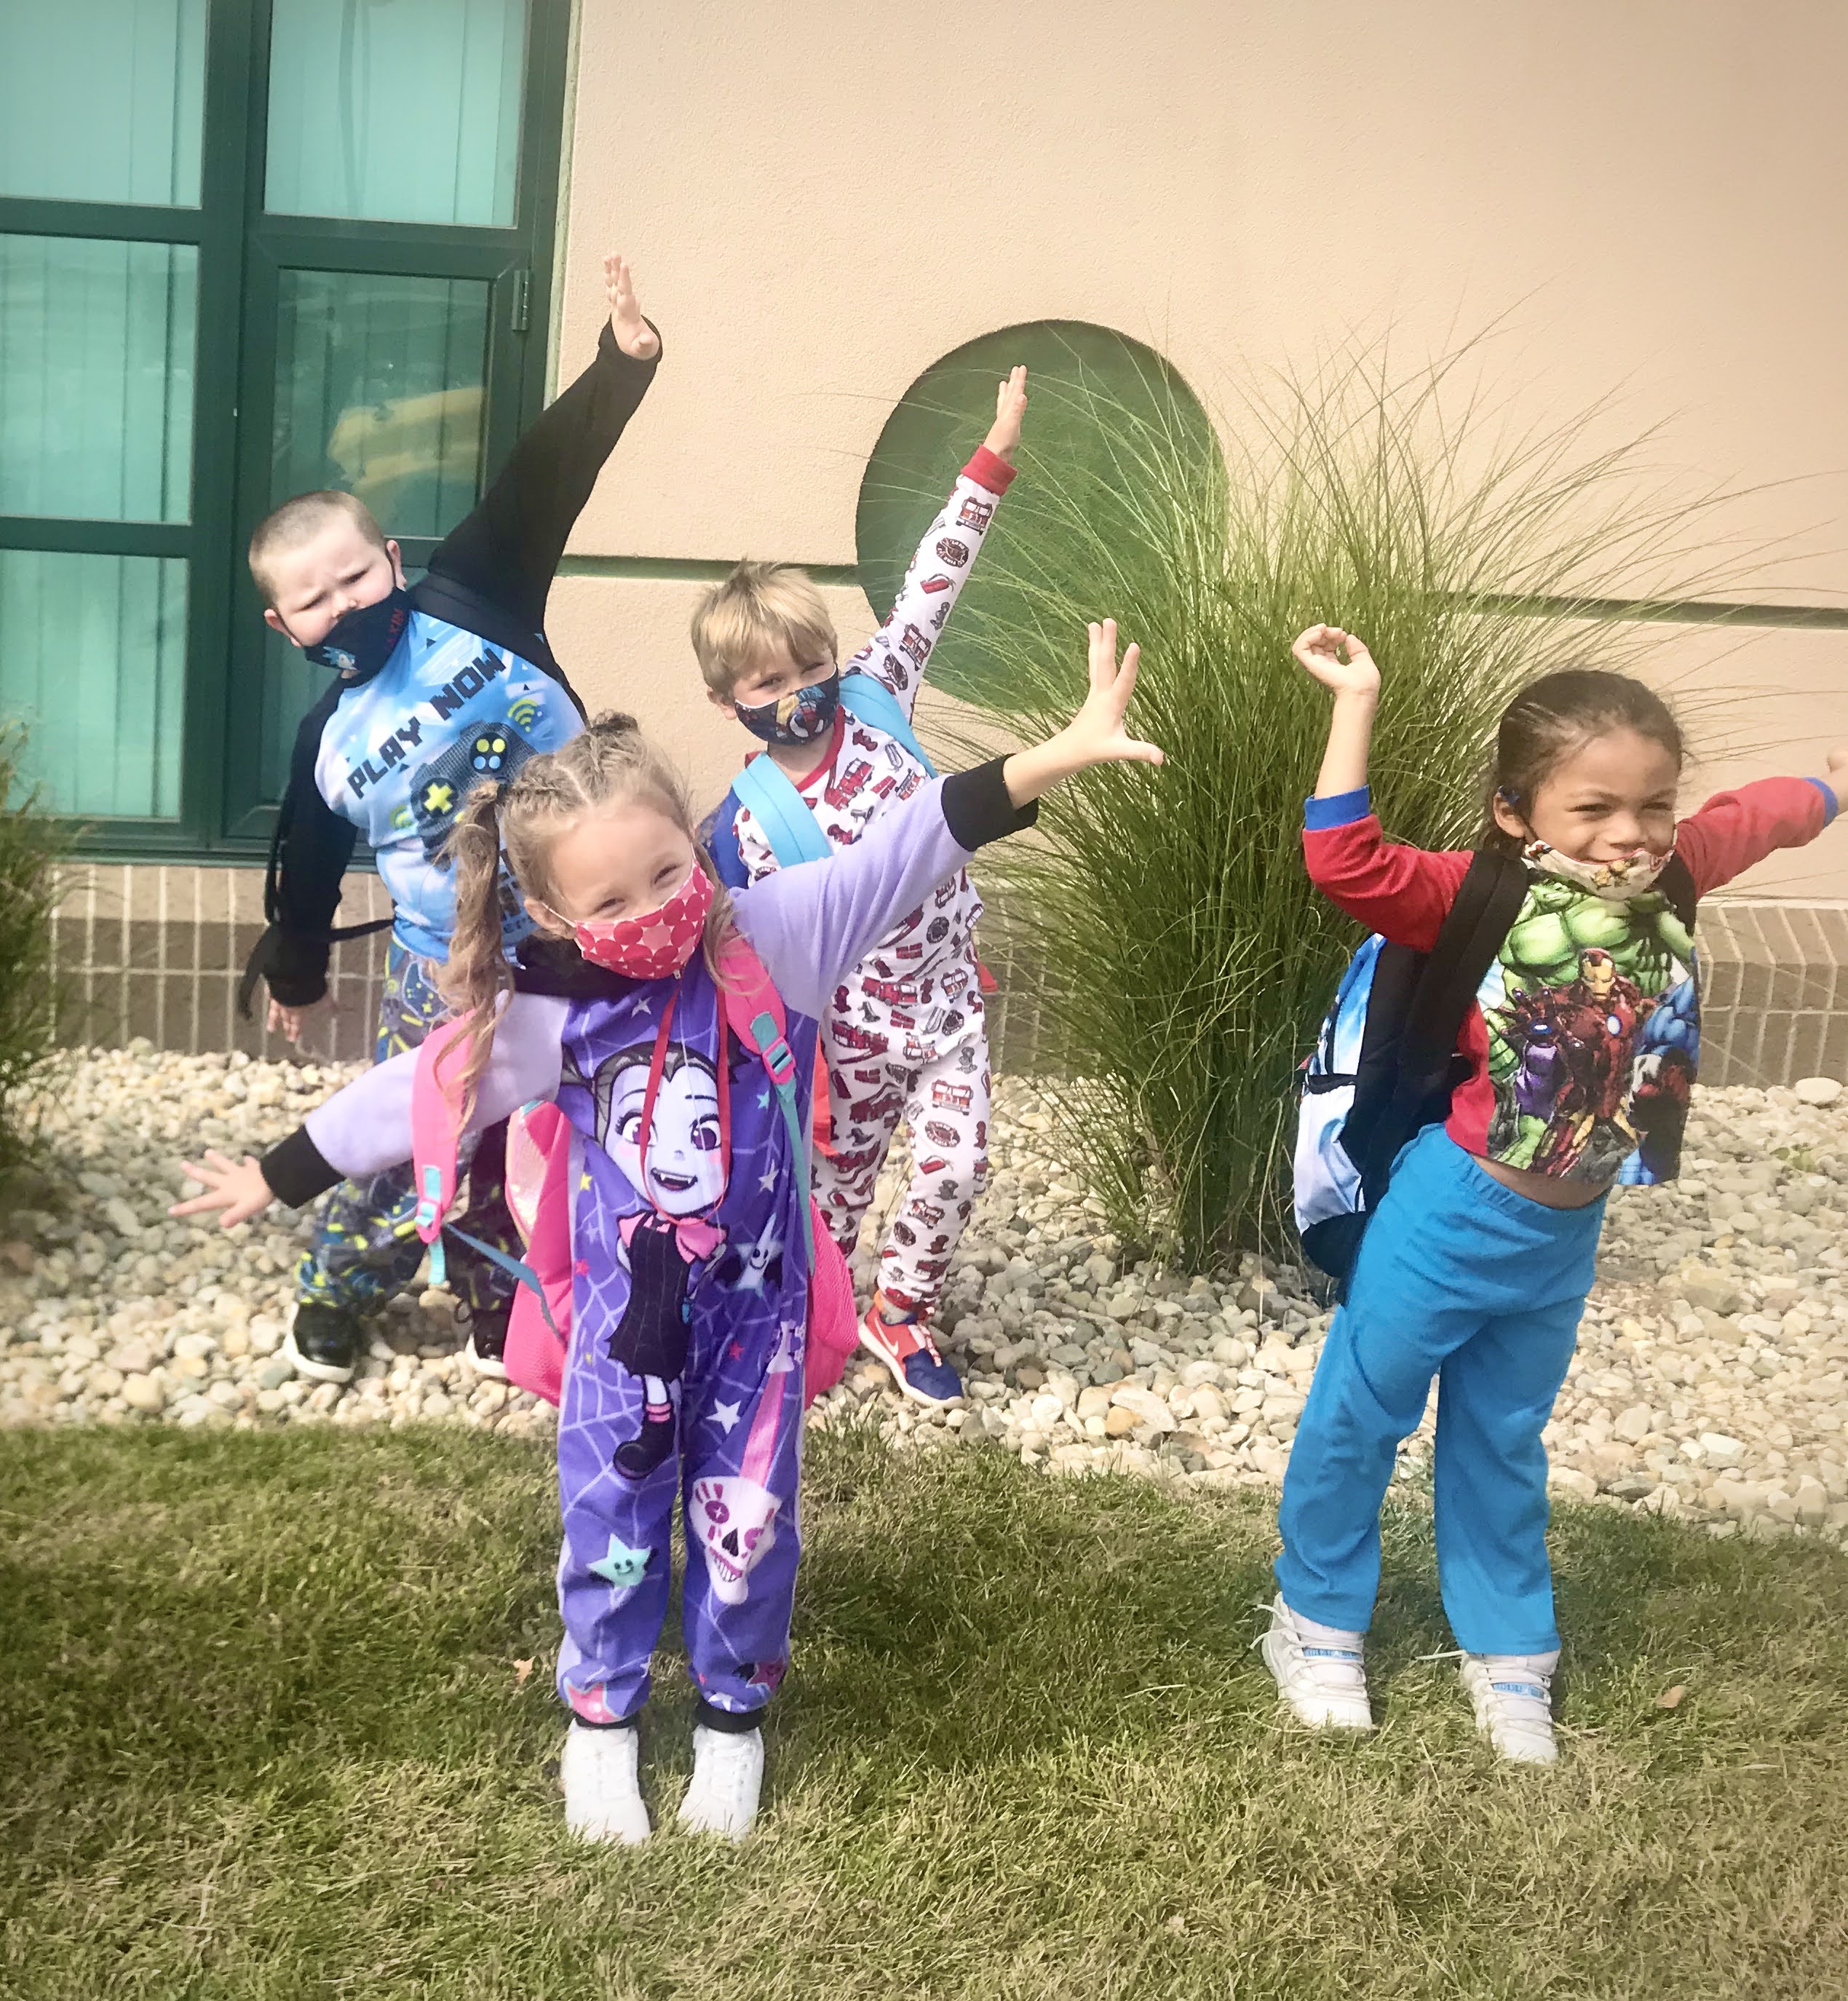 Four students dressed in PJs